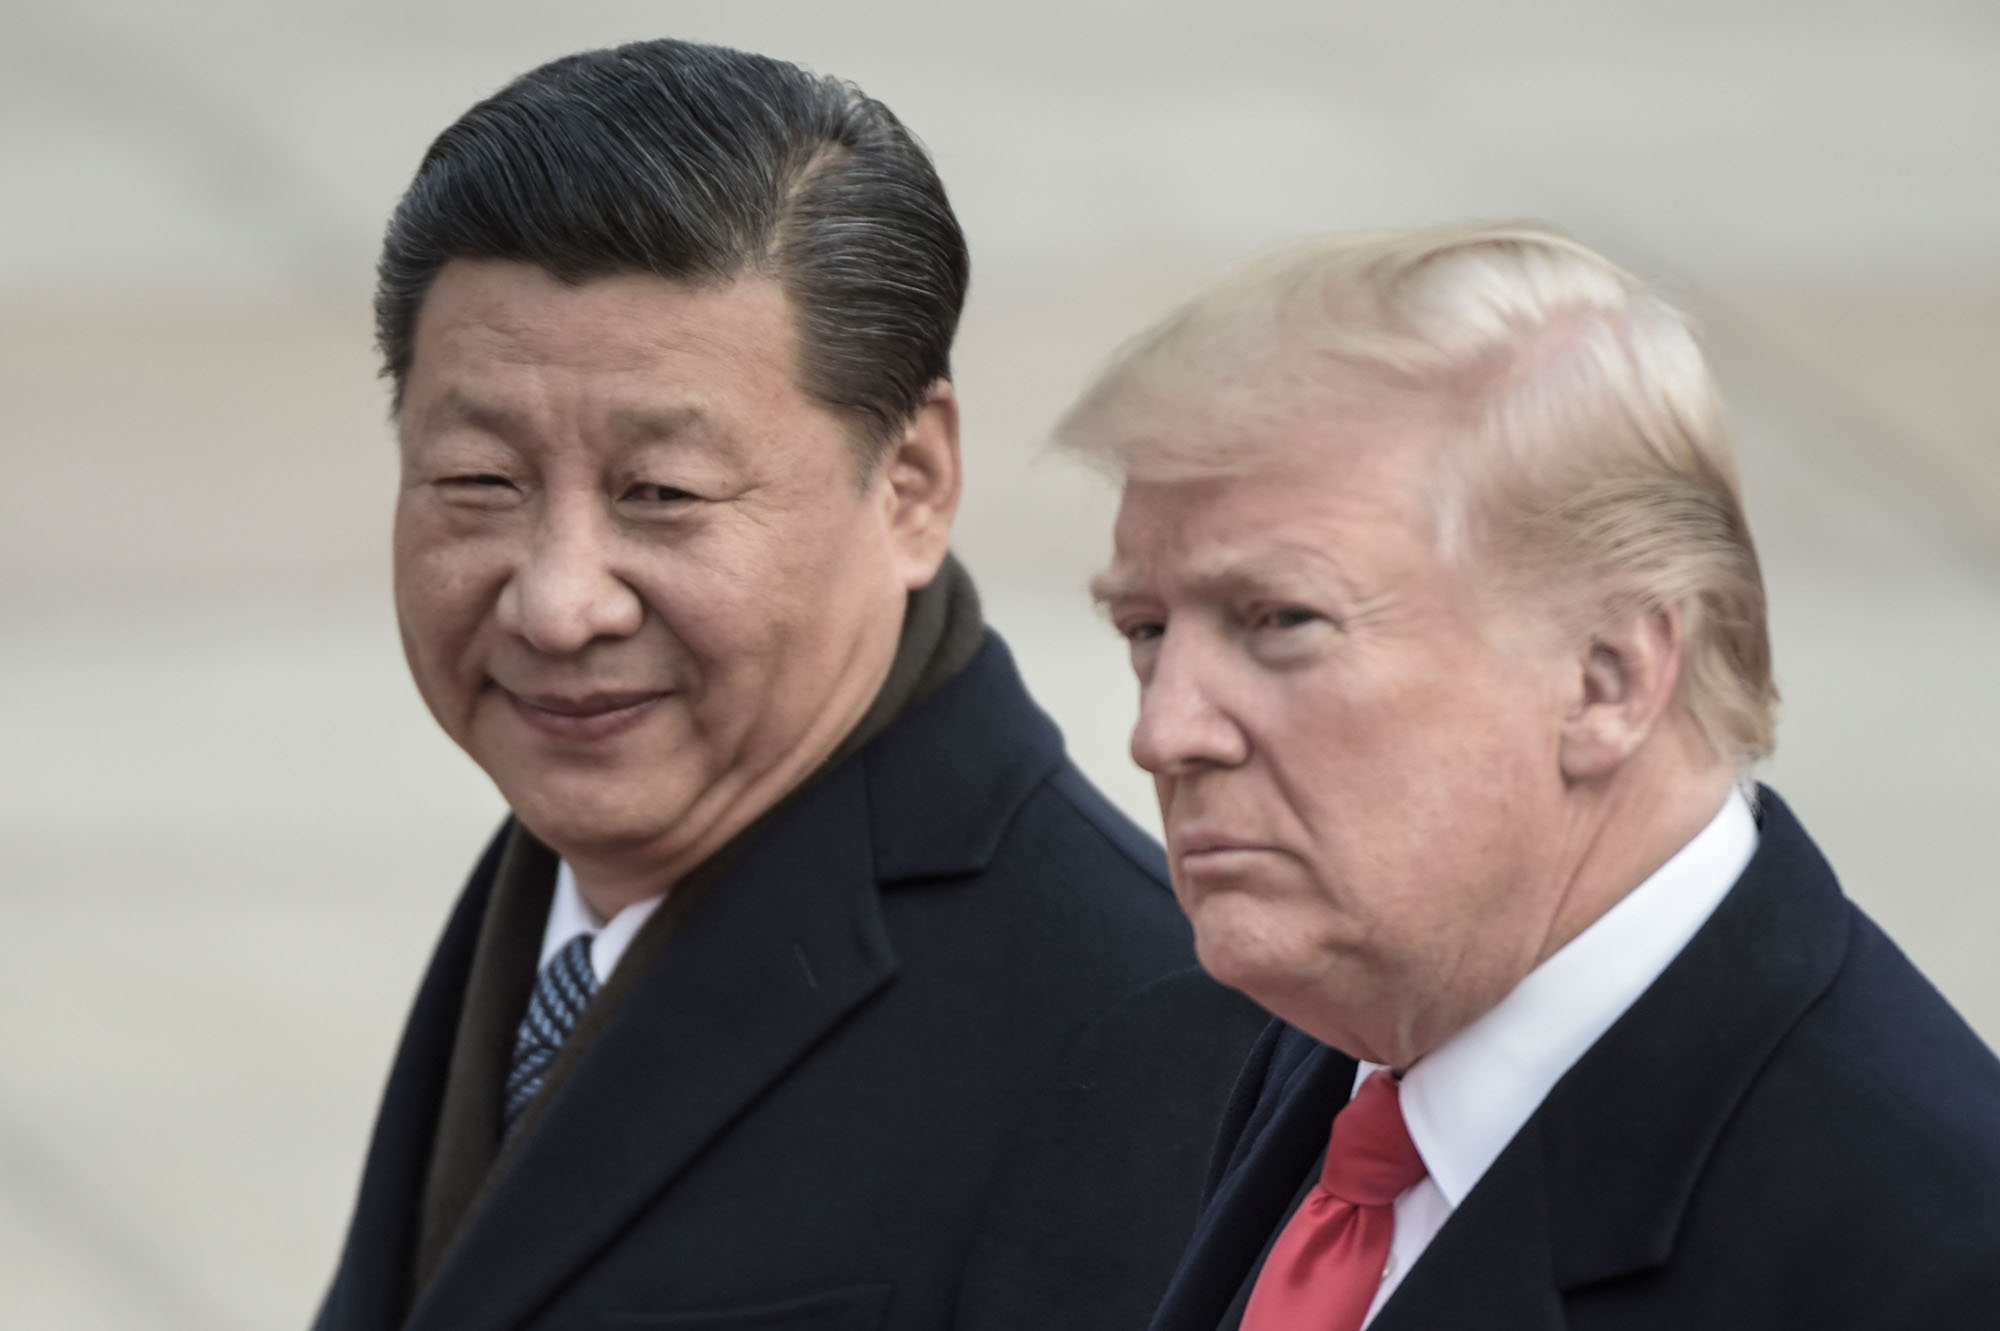 Chinese President Xi Jinping and U.S. President Donald Trump attend a welcome ceremony at the Great Hall of the People in Beijing in November 2017. | AFP-JIJI